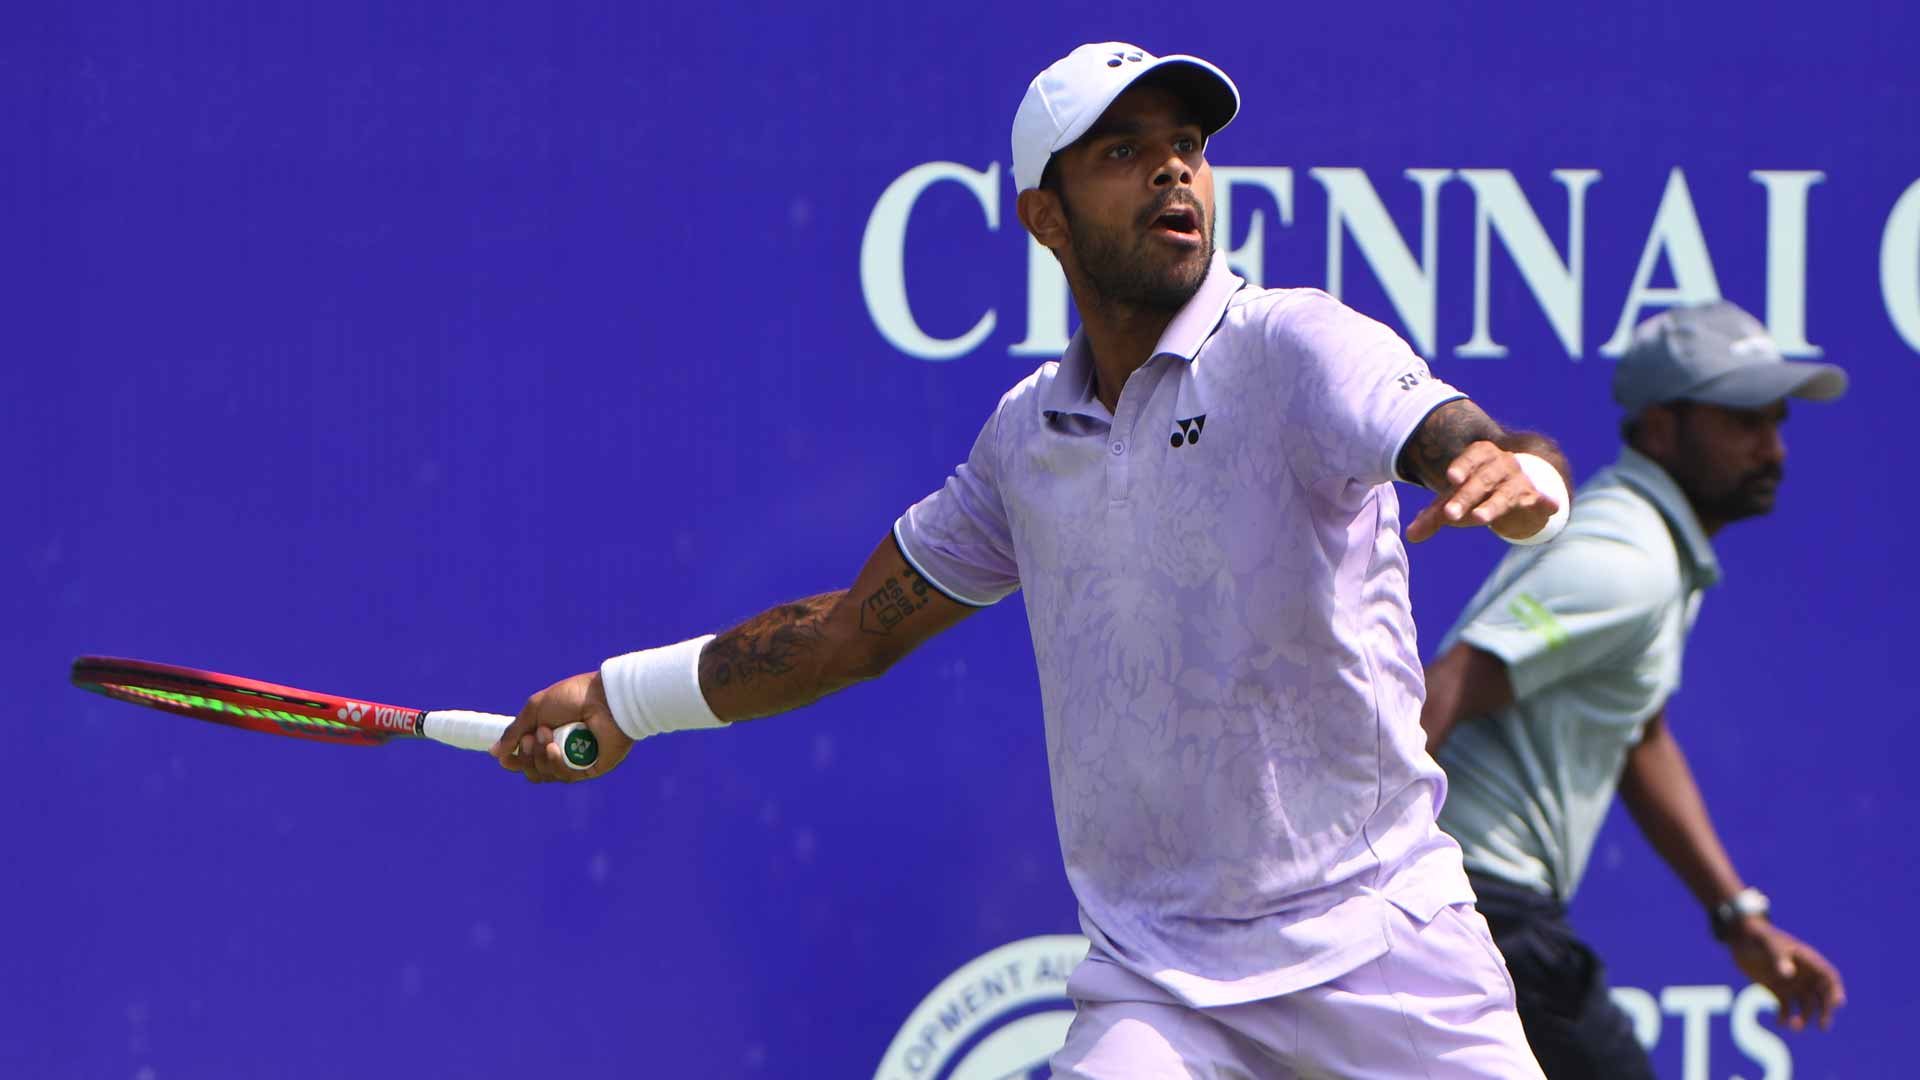 Sumit Nagal is a three-time ATP Challenger Tour champion.